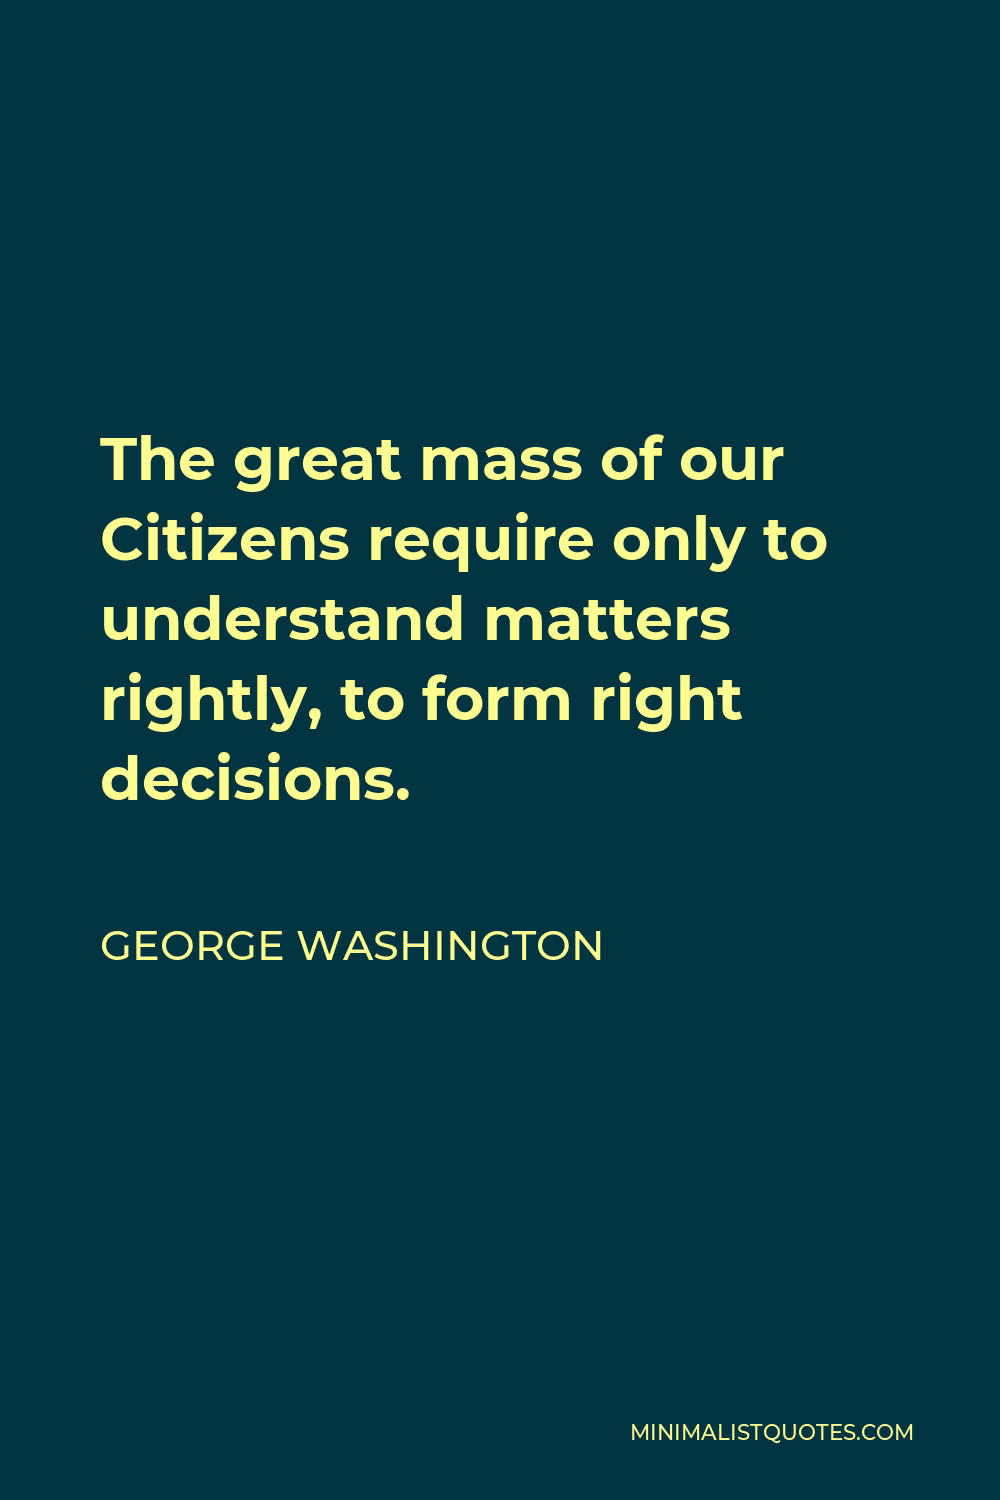 George Washington Quote - The great mass of our Citizens require only to understand matters rightly, to form right decisions.